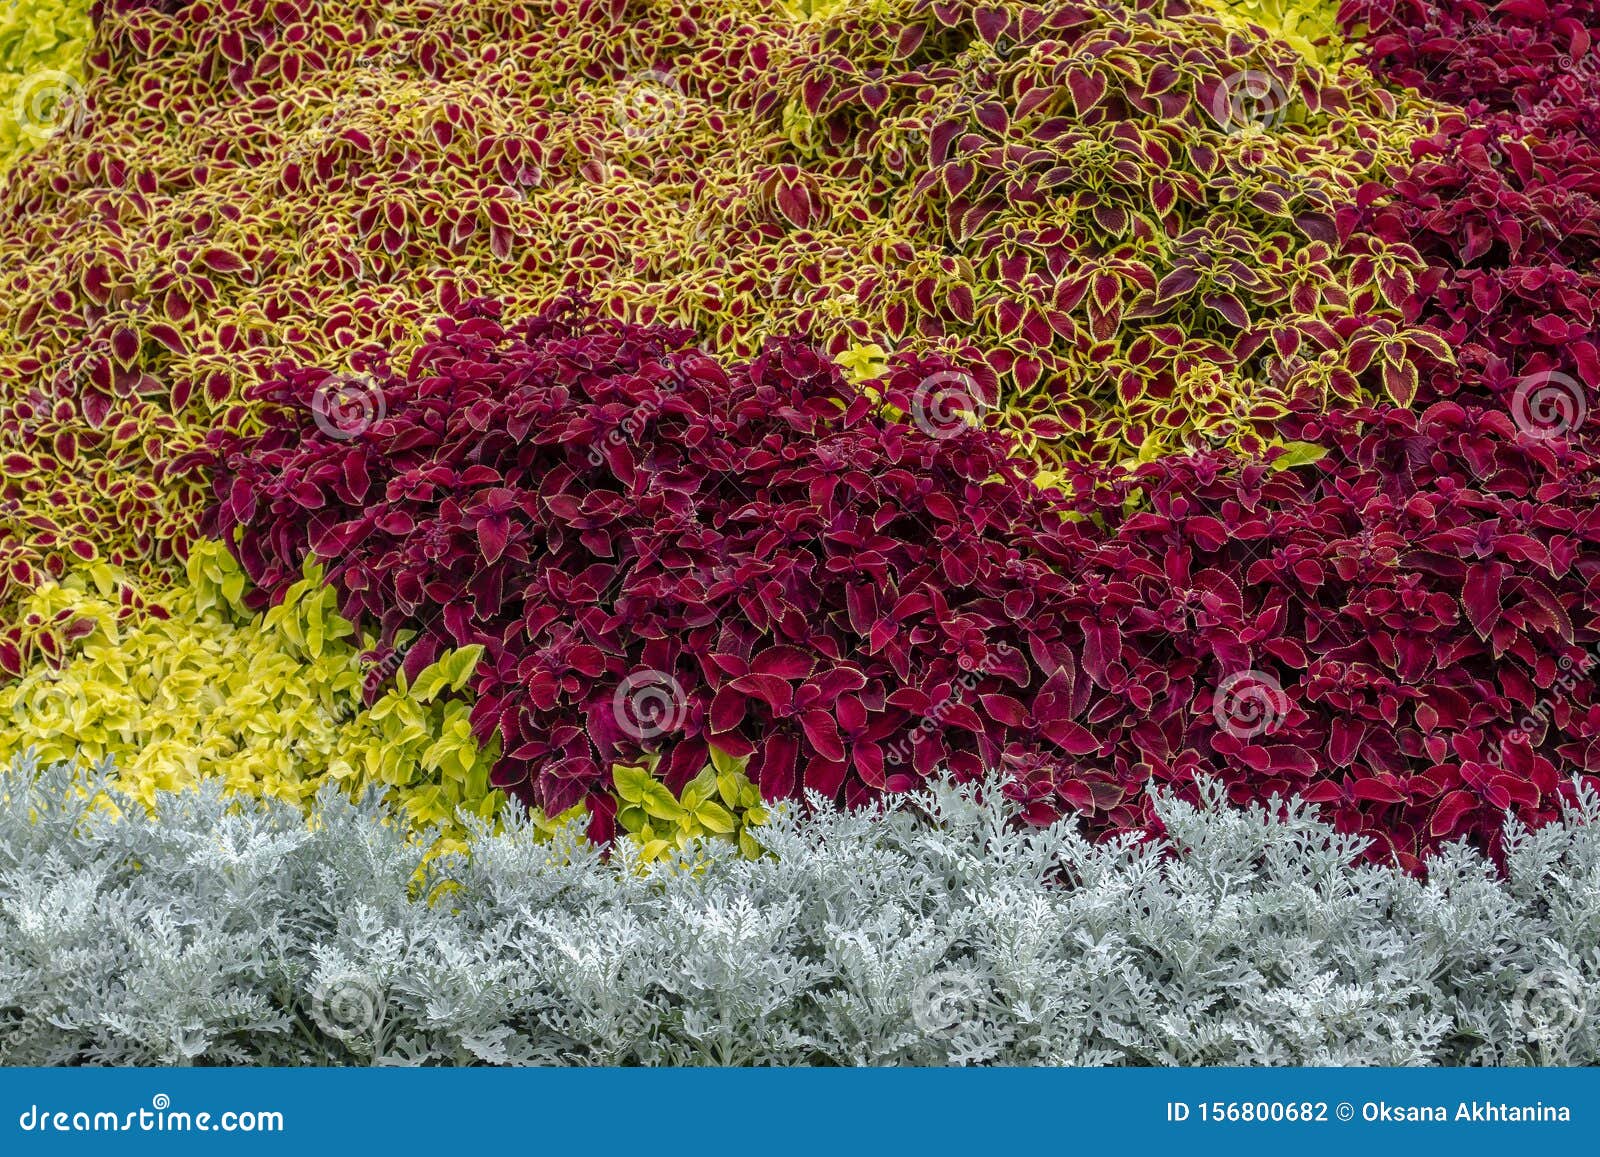 A Flower Bed With Silver Cineraria A Red Coleus In A City Park On A Summer Day Landscape Design Floral Background Stock Photo Image Of Gardening Maritima 156800682